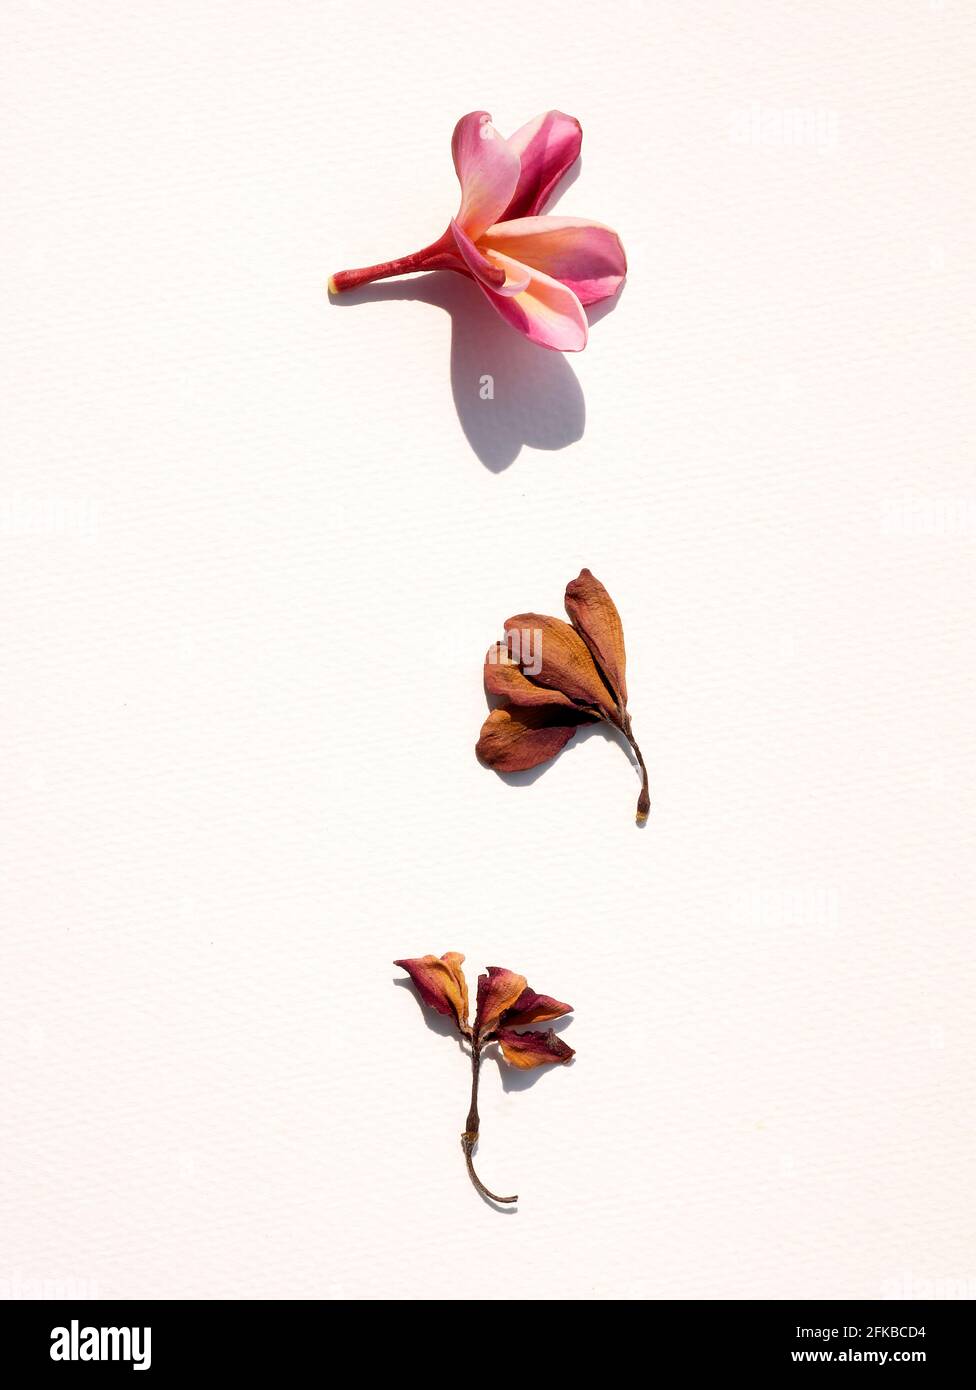 A STILL LIFE OF THE INDIAN PINK CHAMPA FLOWER SHOWING PROGRESSION FROM A FRESH FLOWER DECAYING SLOWLY TO BEING COMPLETELY DRY Stock Photo